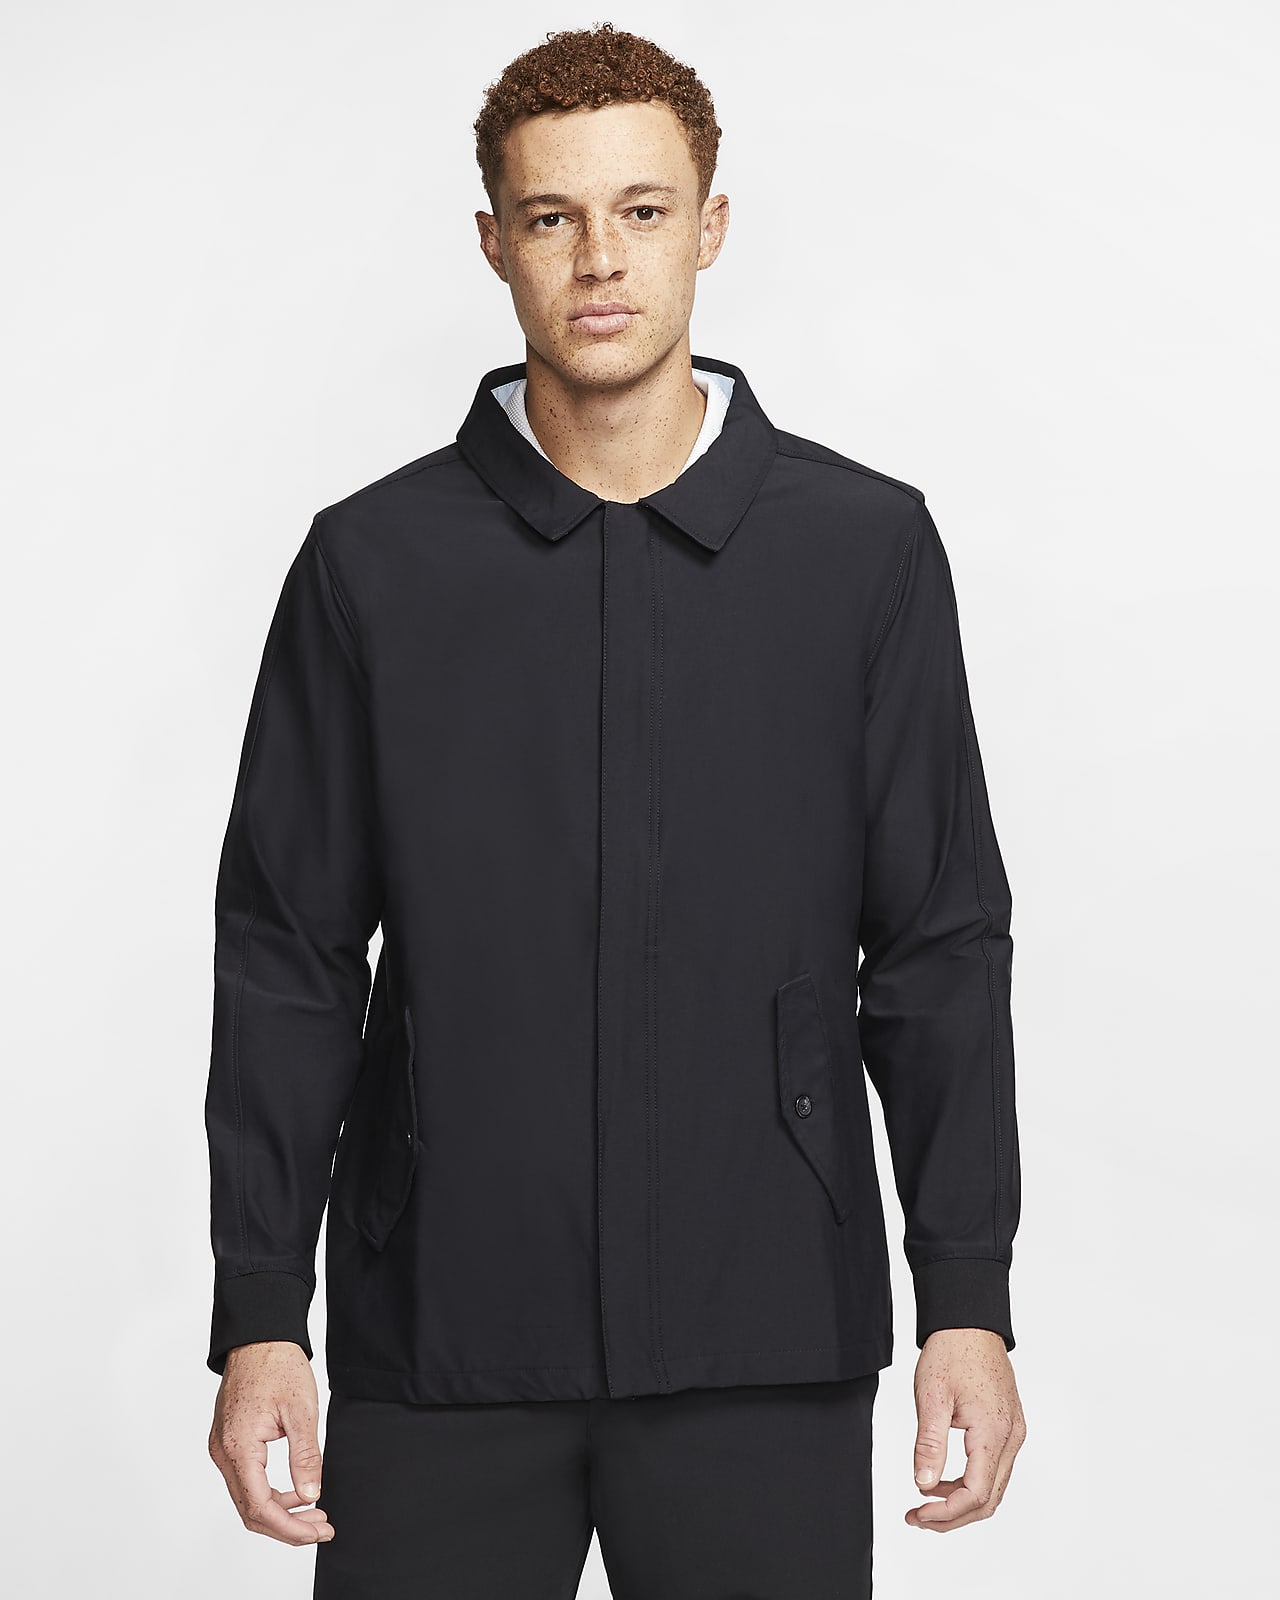 nike repel jacket review